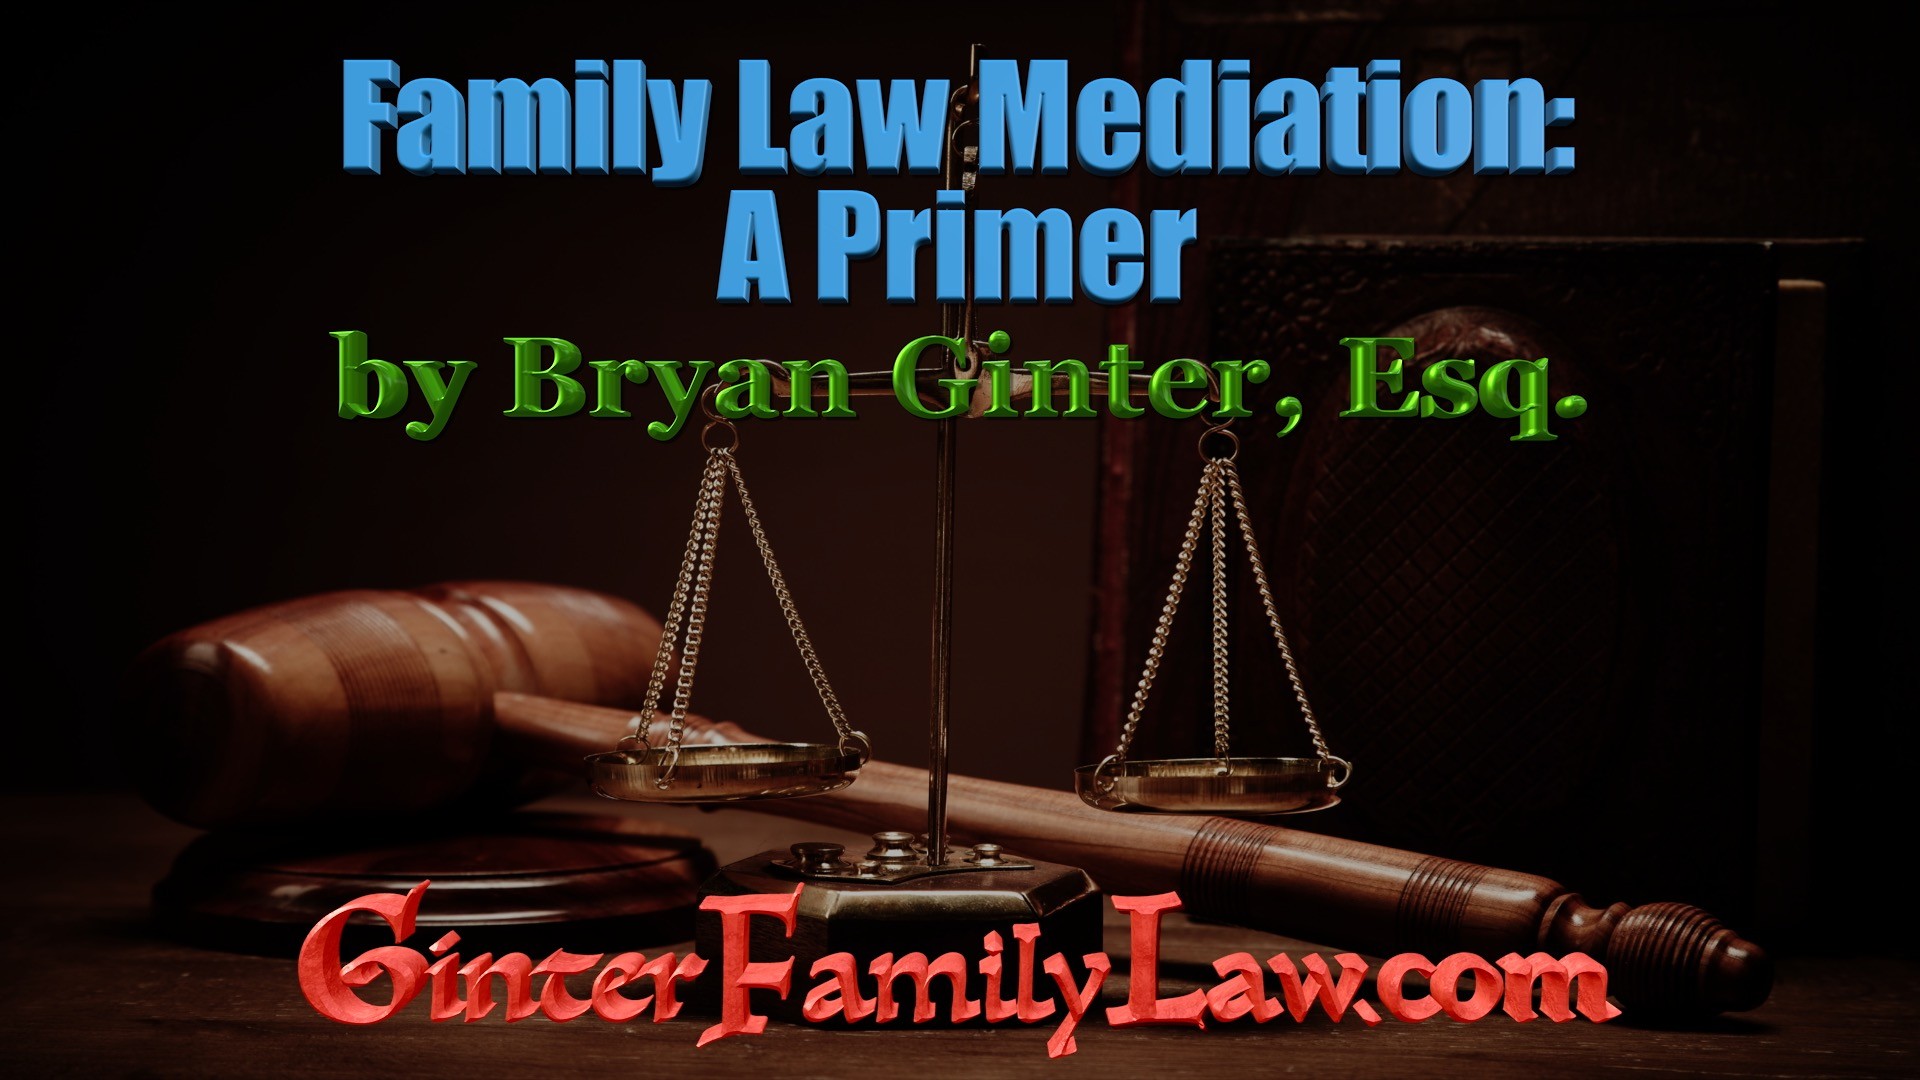 Family Law mediation is typically a quicker and less expensive way to resolve family law cases out of court.